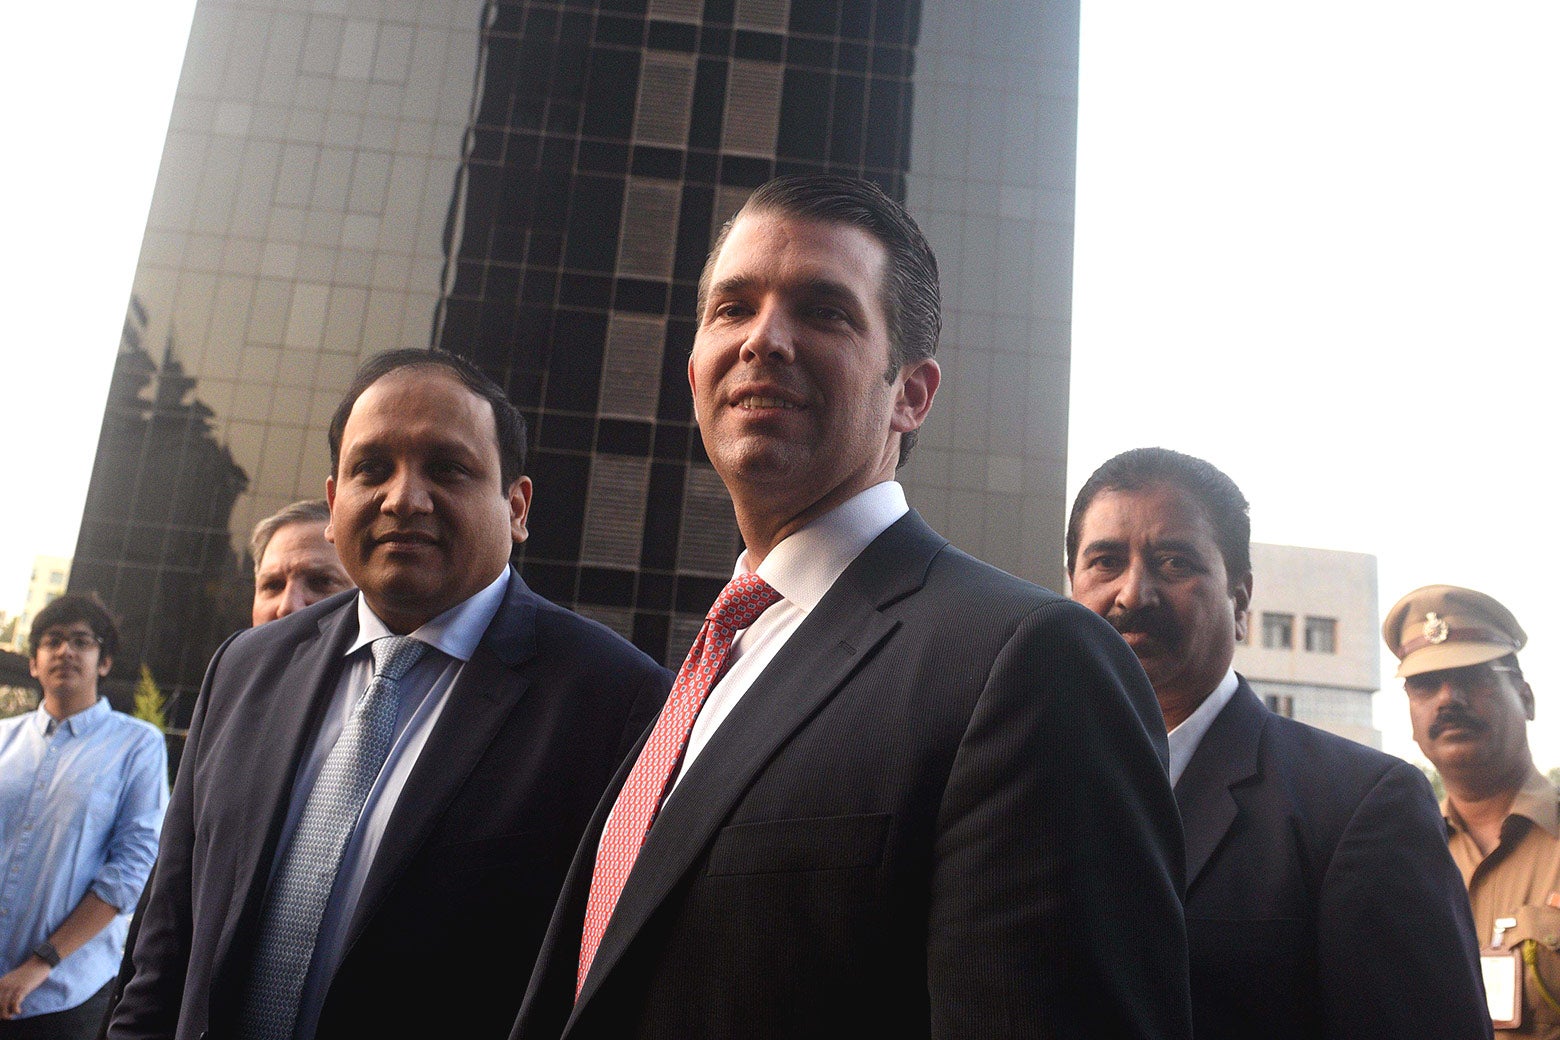 US President Donald Trump's son and businessman Donald Trump Junior during the launch of tower two of Trump Towers, Pune at Kalyani Nagar, on February 21, 2018 in Pune, India.